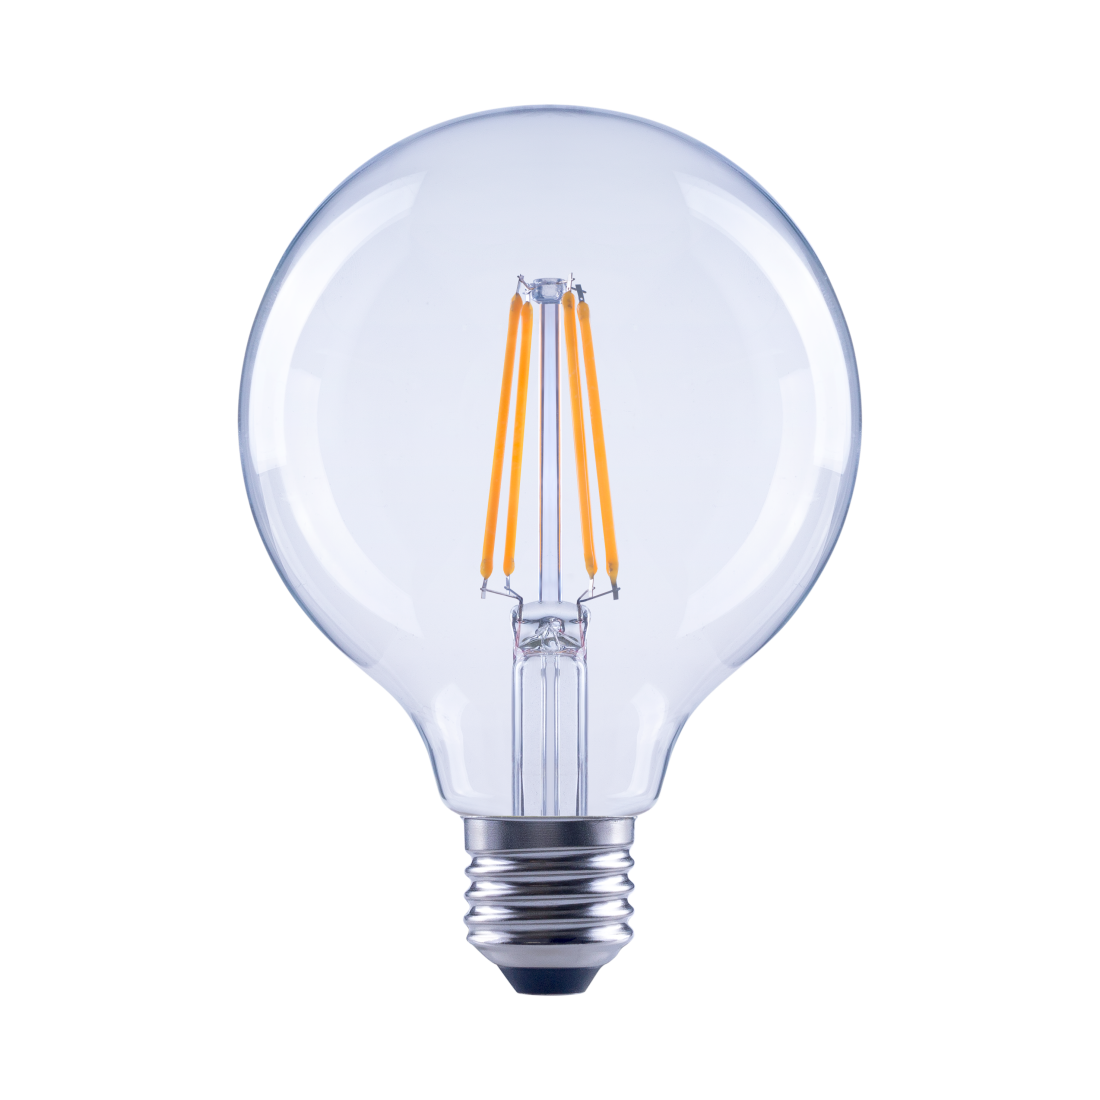 abx High-Res Image - Xavax, LED Filament, E27, 806 lm Replaces 60 W, Globe Bulb, G95, clear, warm white